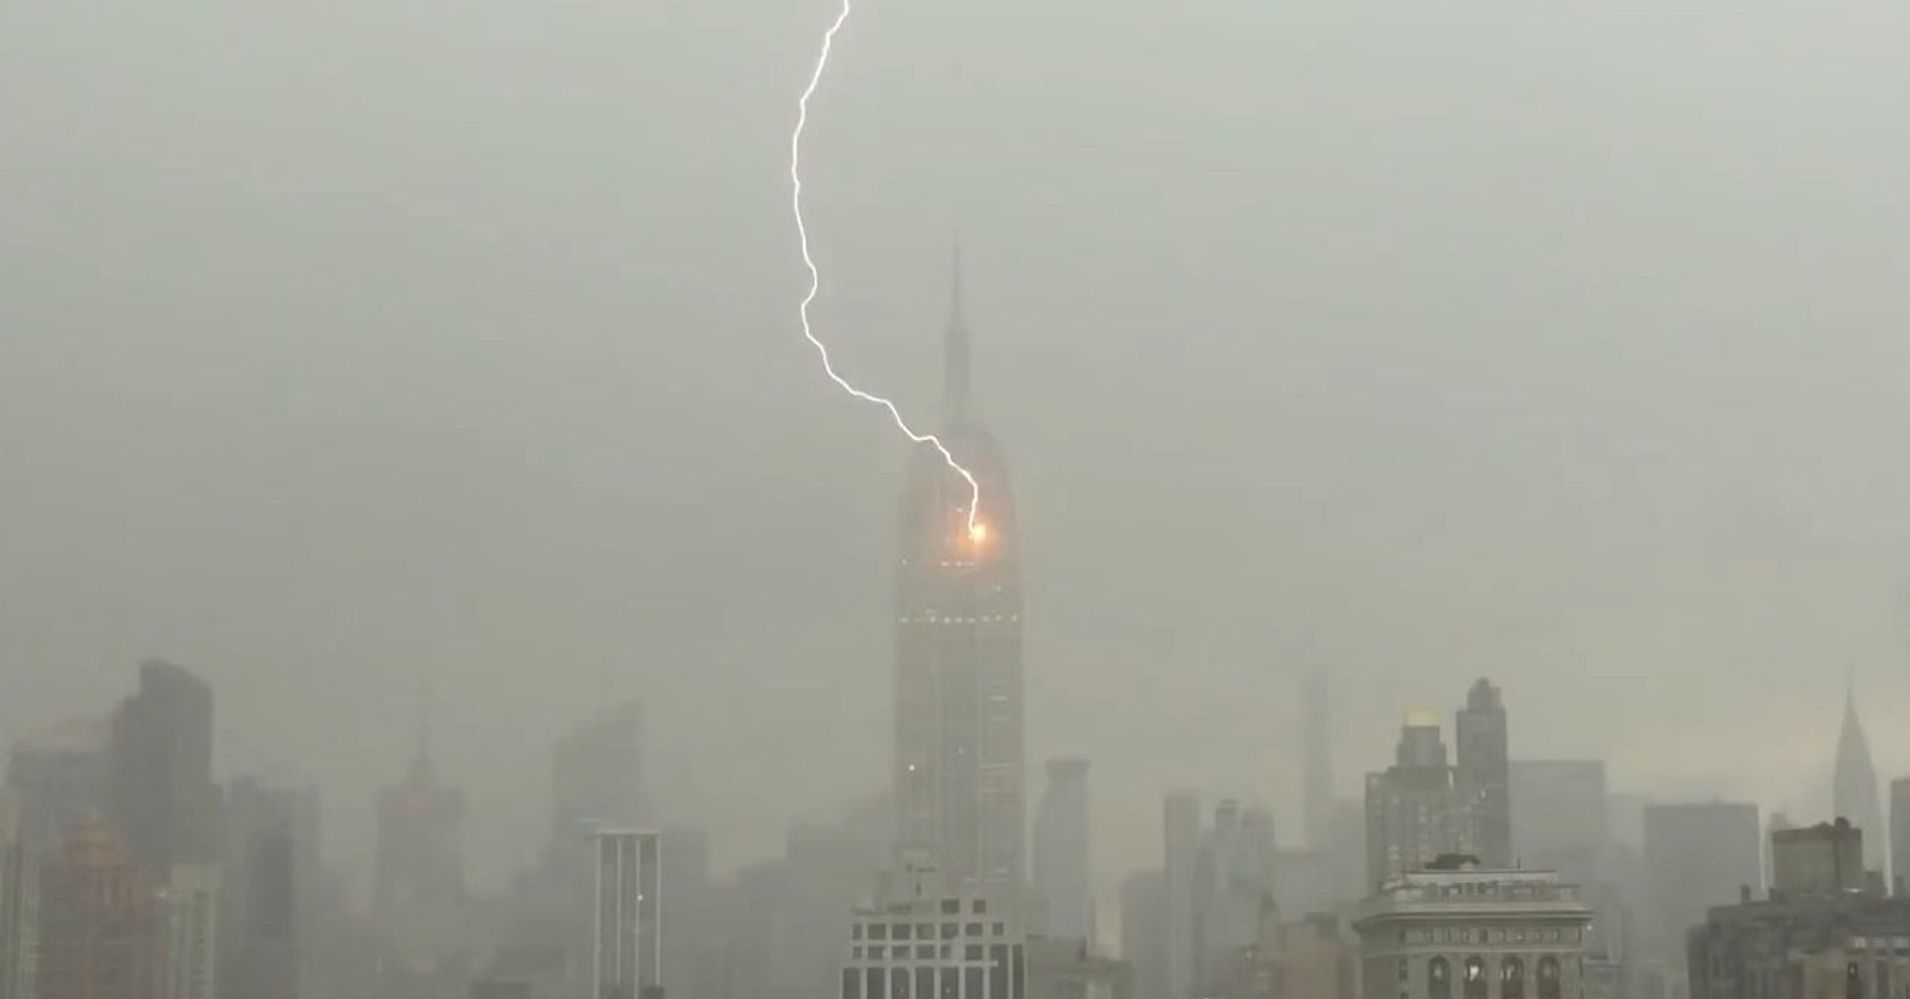 Empire State Building Struck By Lightning In Dramatic Time-Lapse Video ...